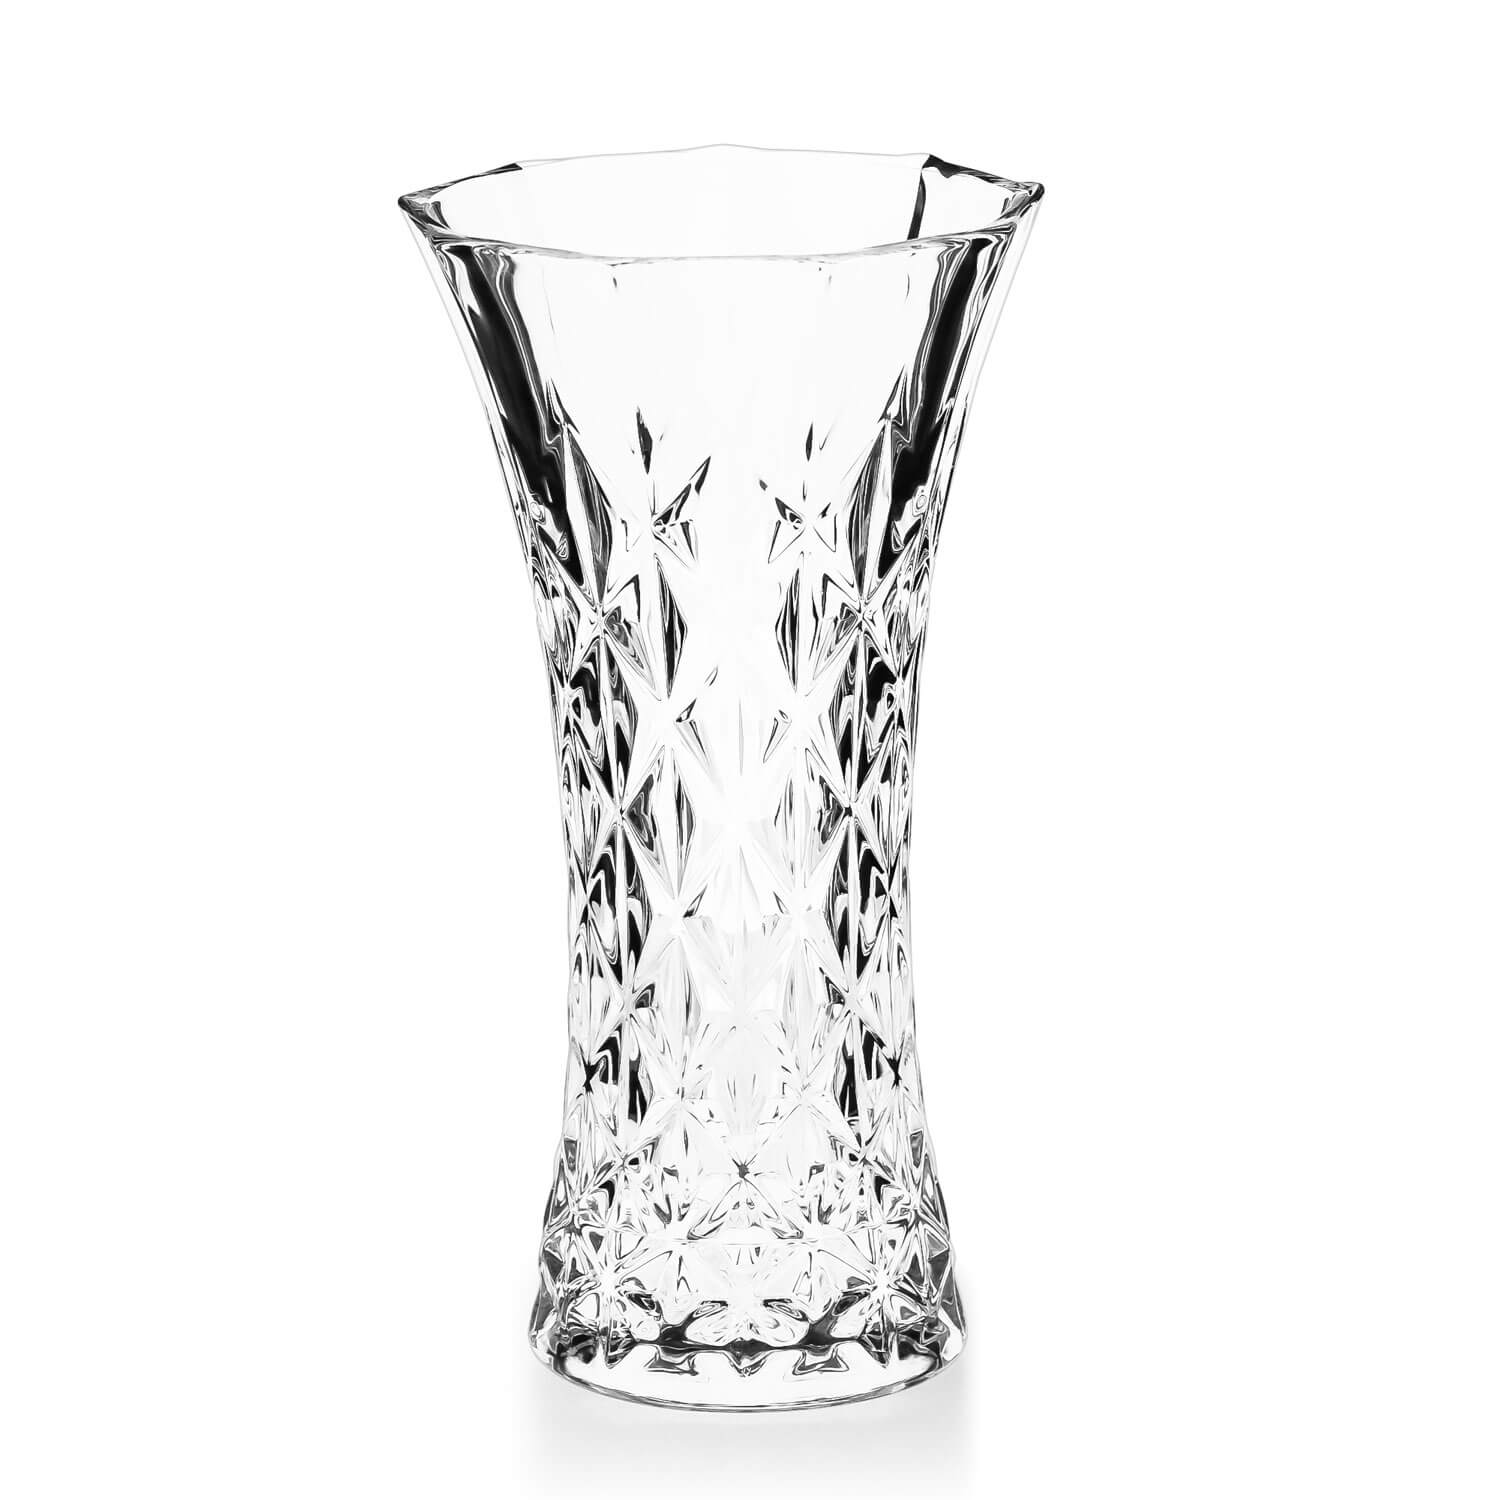 Tipperary Crystal Belvedere 12 Vase 1 Shaws Department Stores